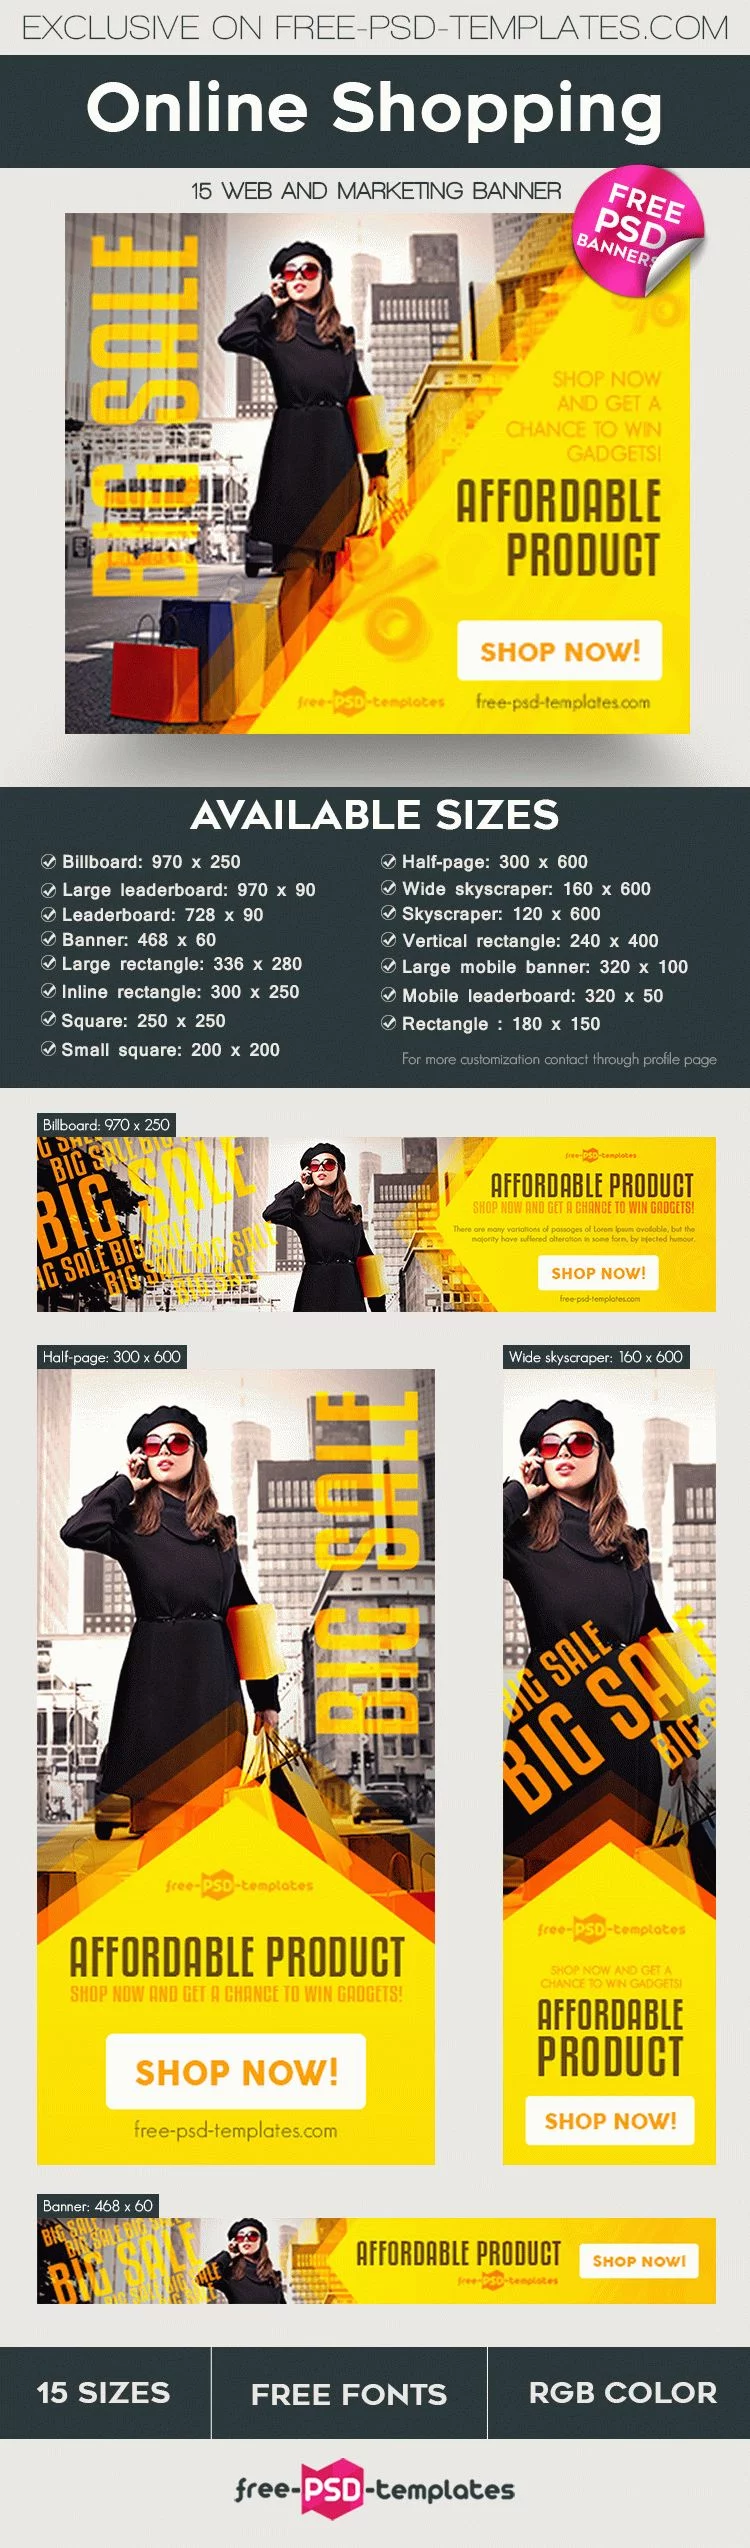 15 Free Online Shopping Banner in PSD